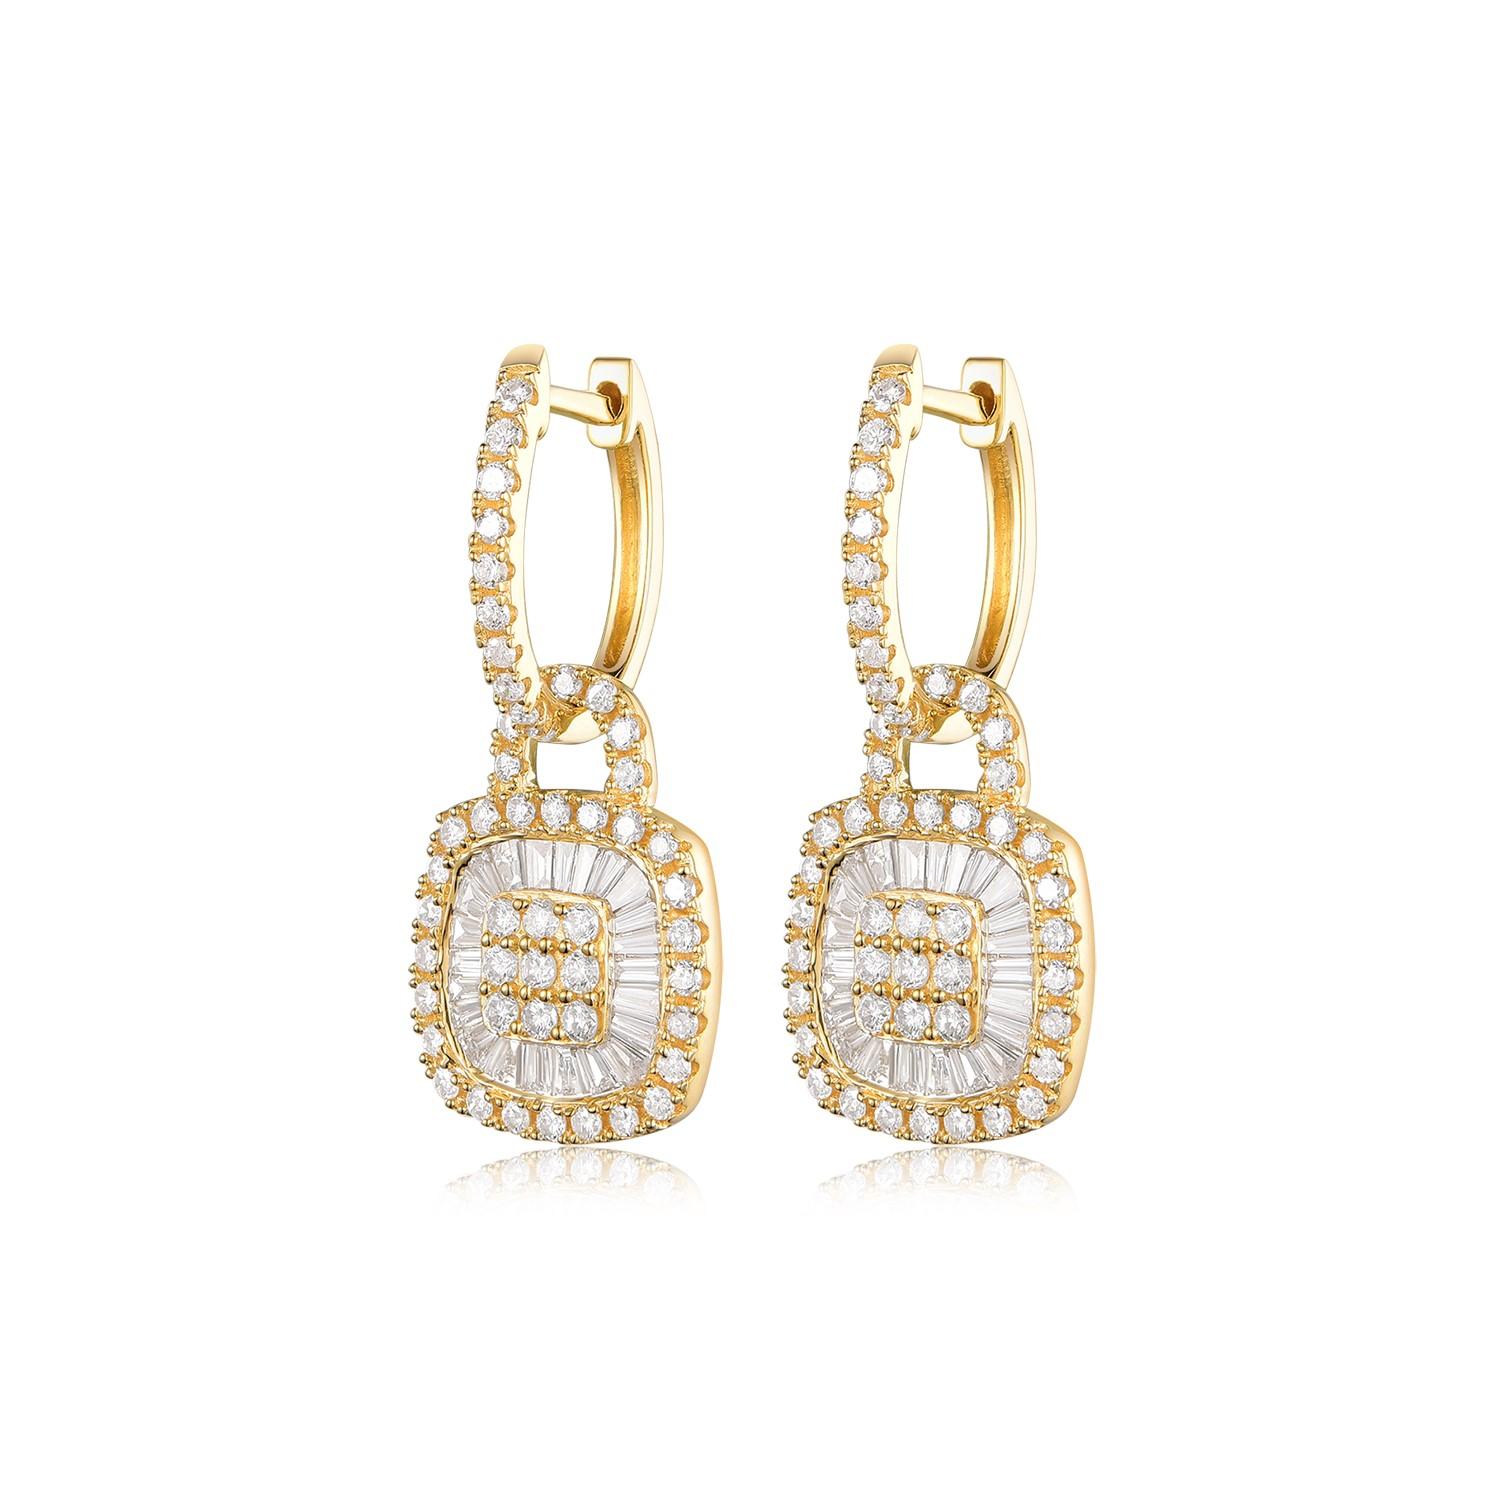 Adorn yourself with the timeless elegance of these expertly crafted earrings. Each piece showcases 0.55 carats of gleaming tapered baguette diamonds, harmoniously complemented by an additional 0.83 carats of round diamonds. Together, they form a